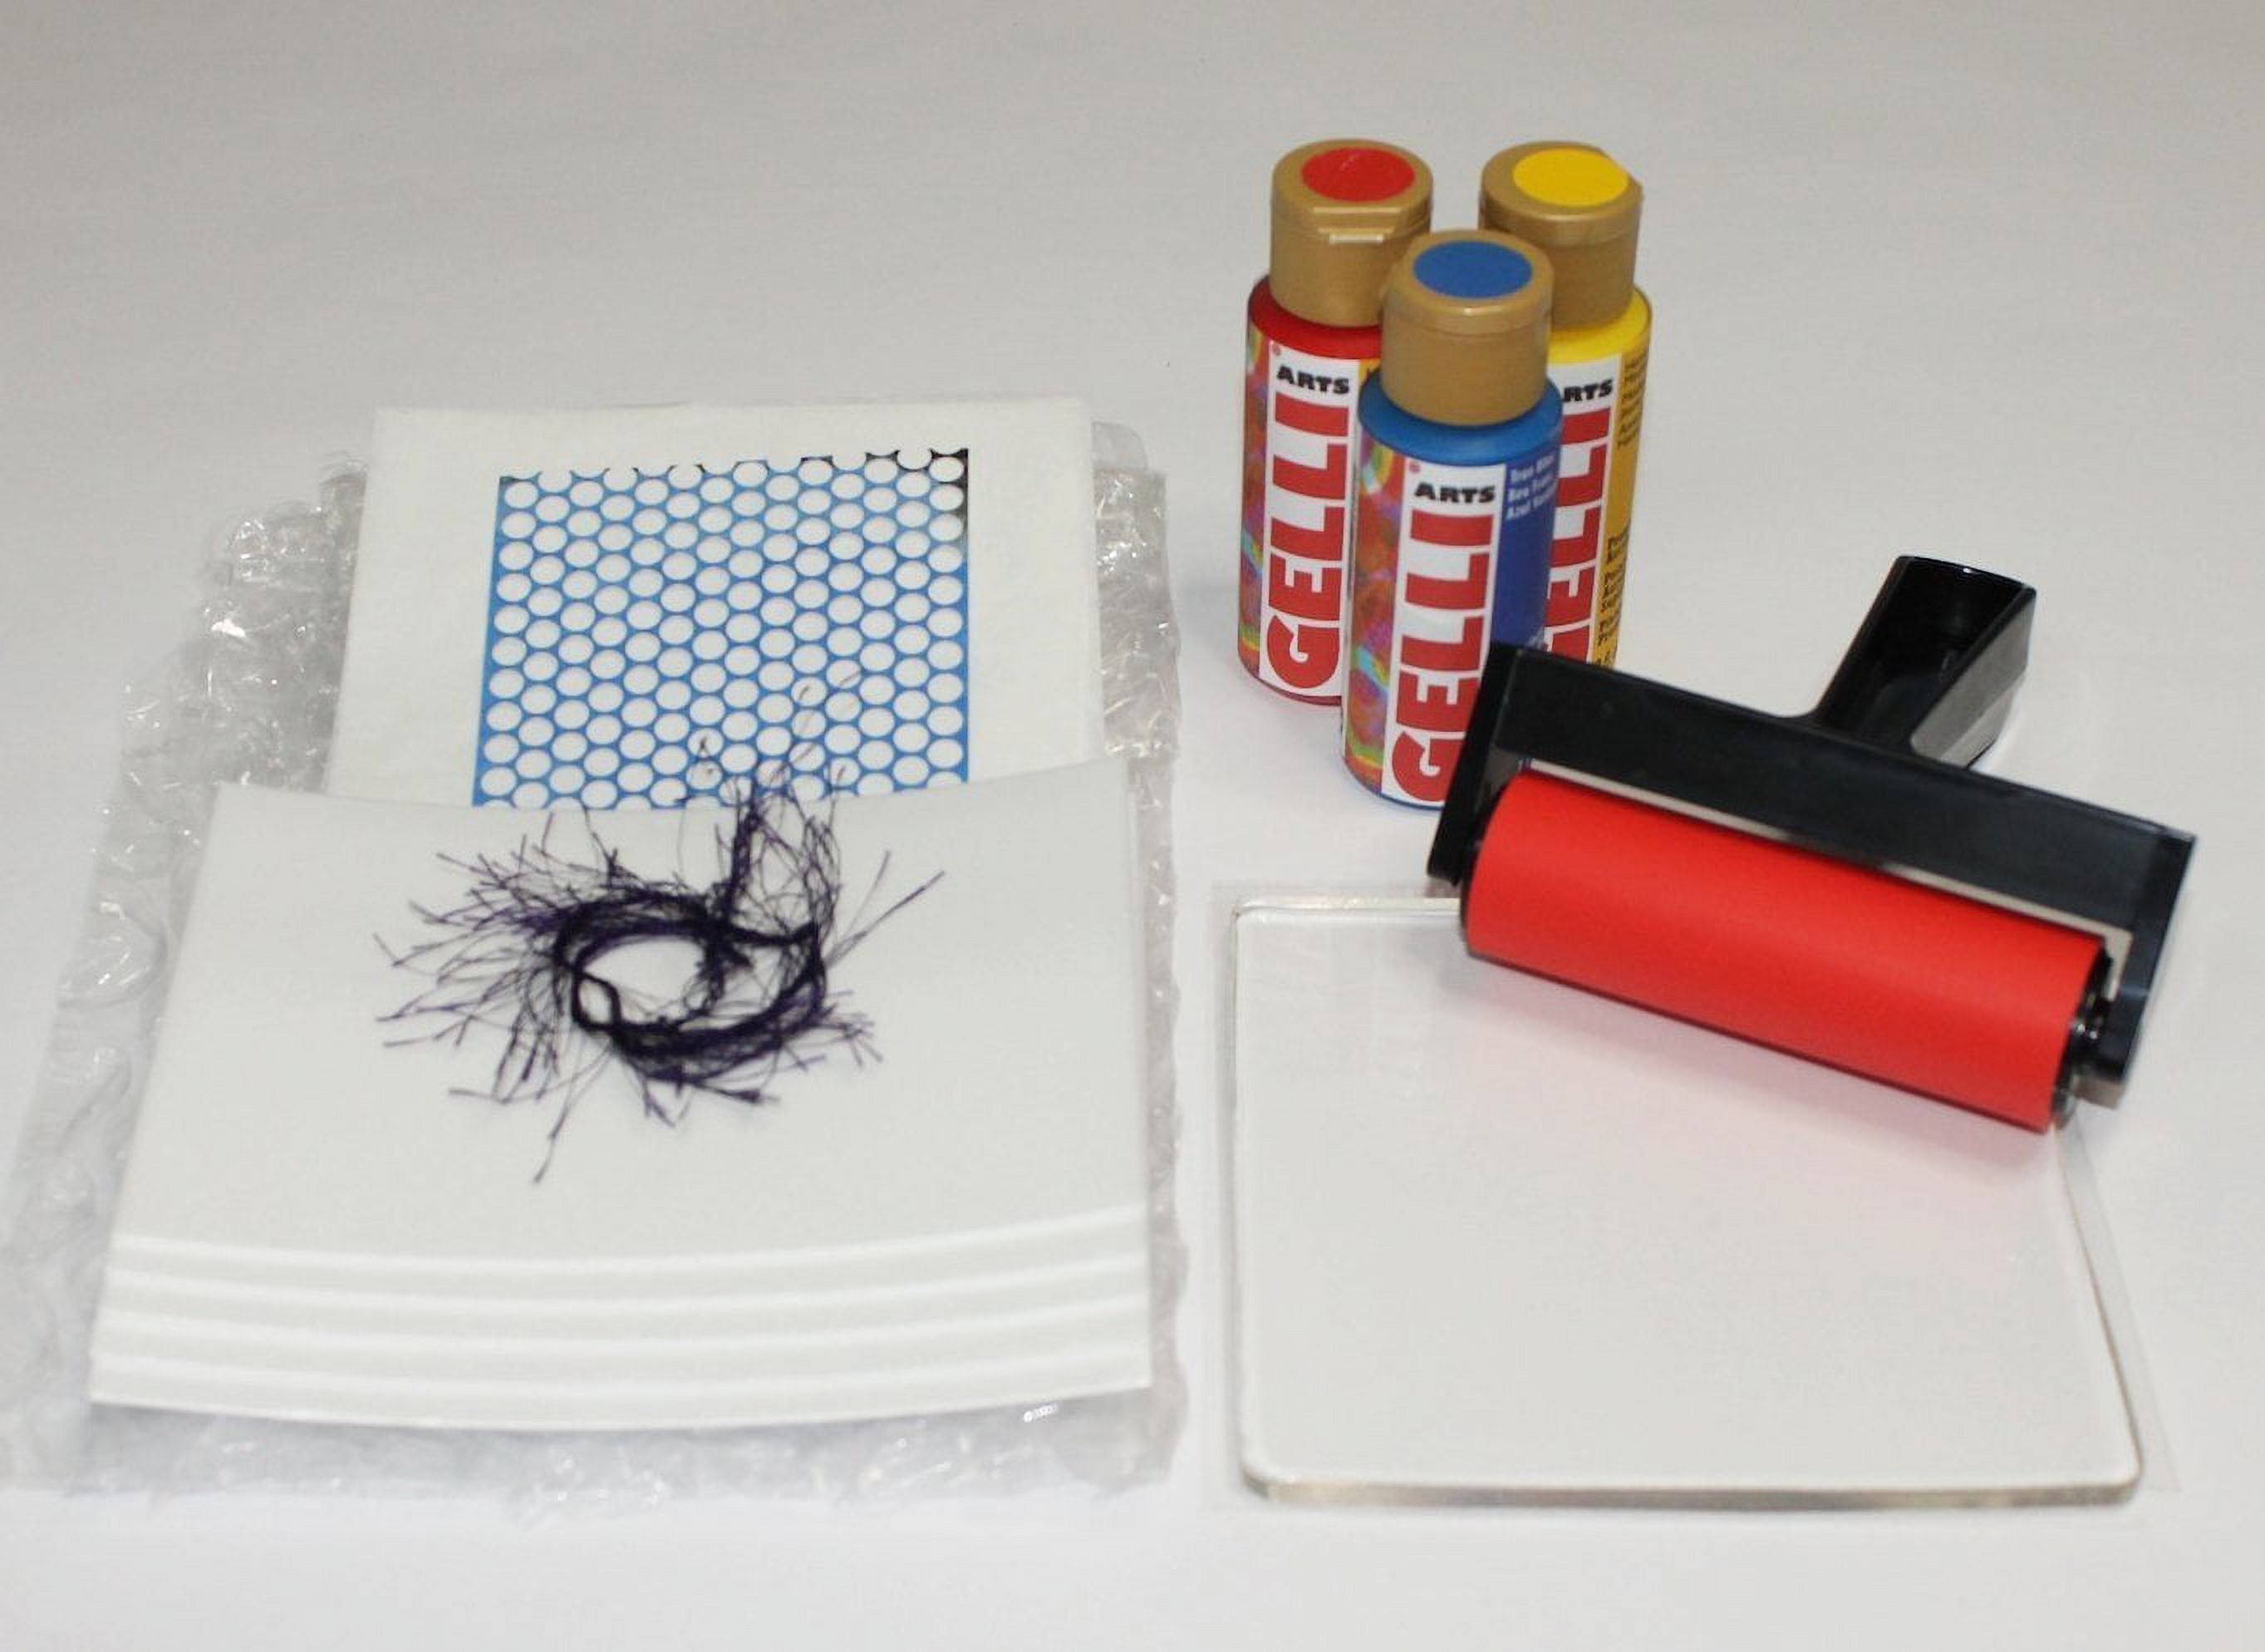  Gelli Arts Stamp Kit with Gel Plate Kit Stamping and